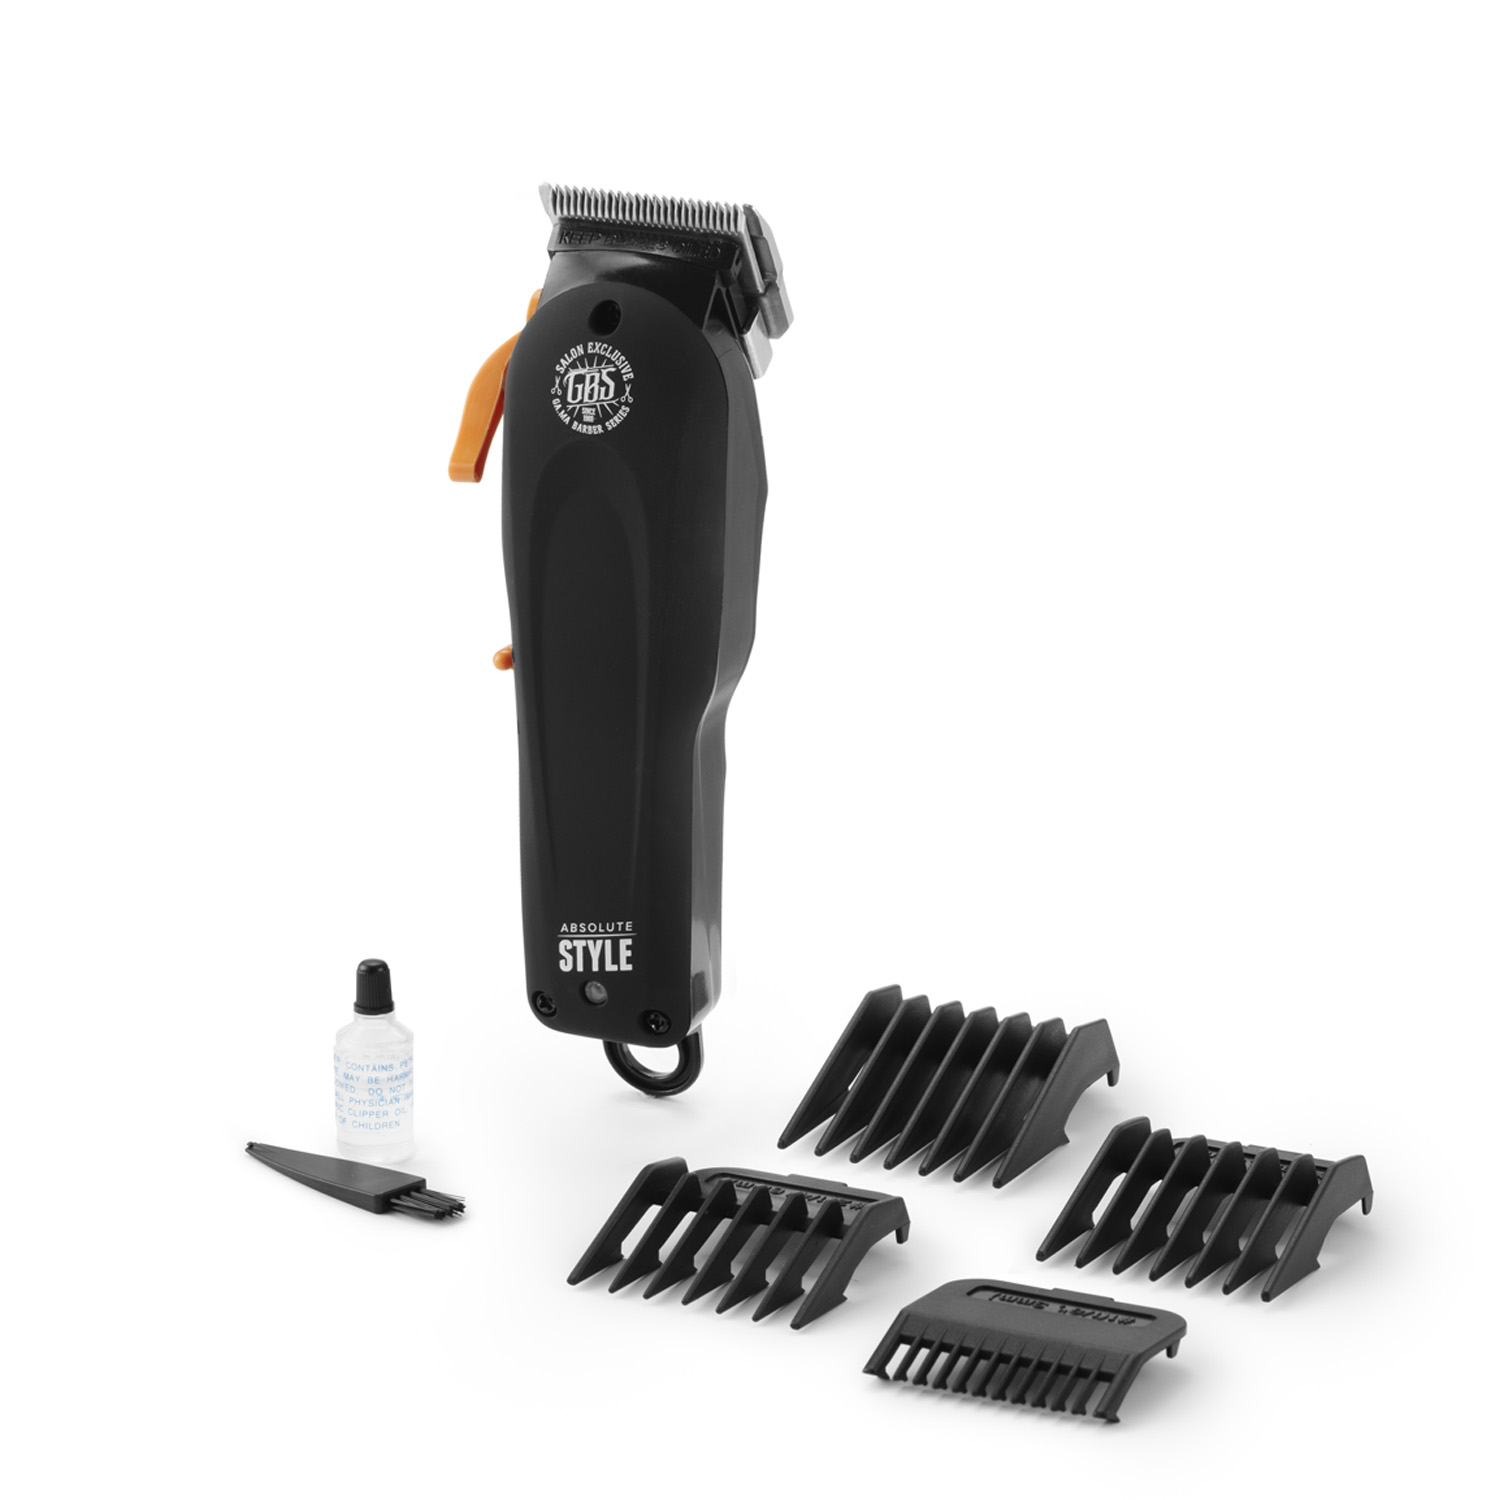 gbs-absolute-style-cordless-clipper